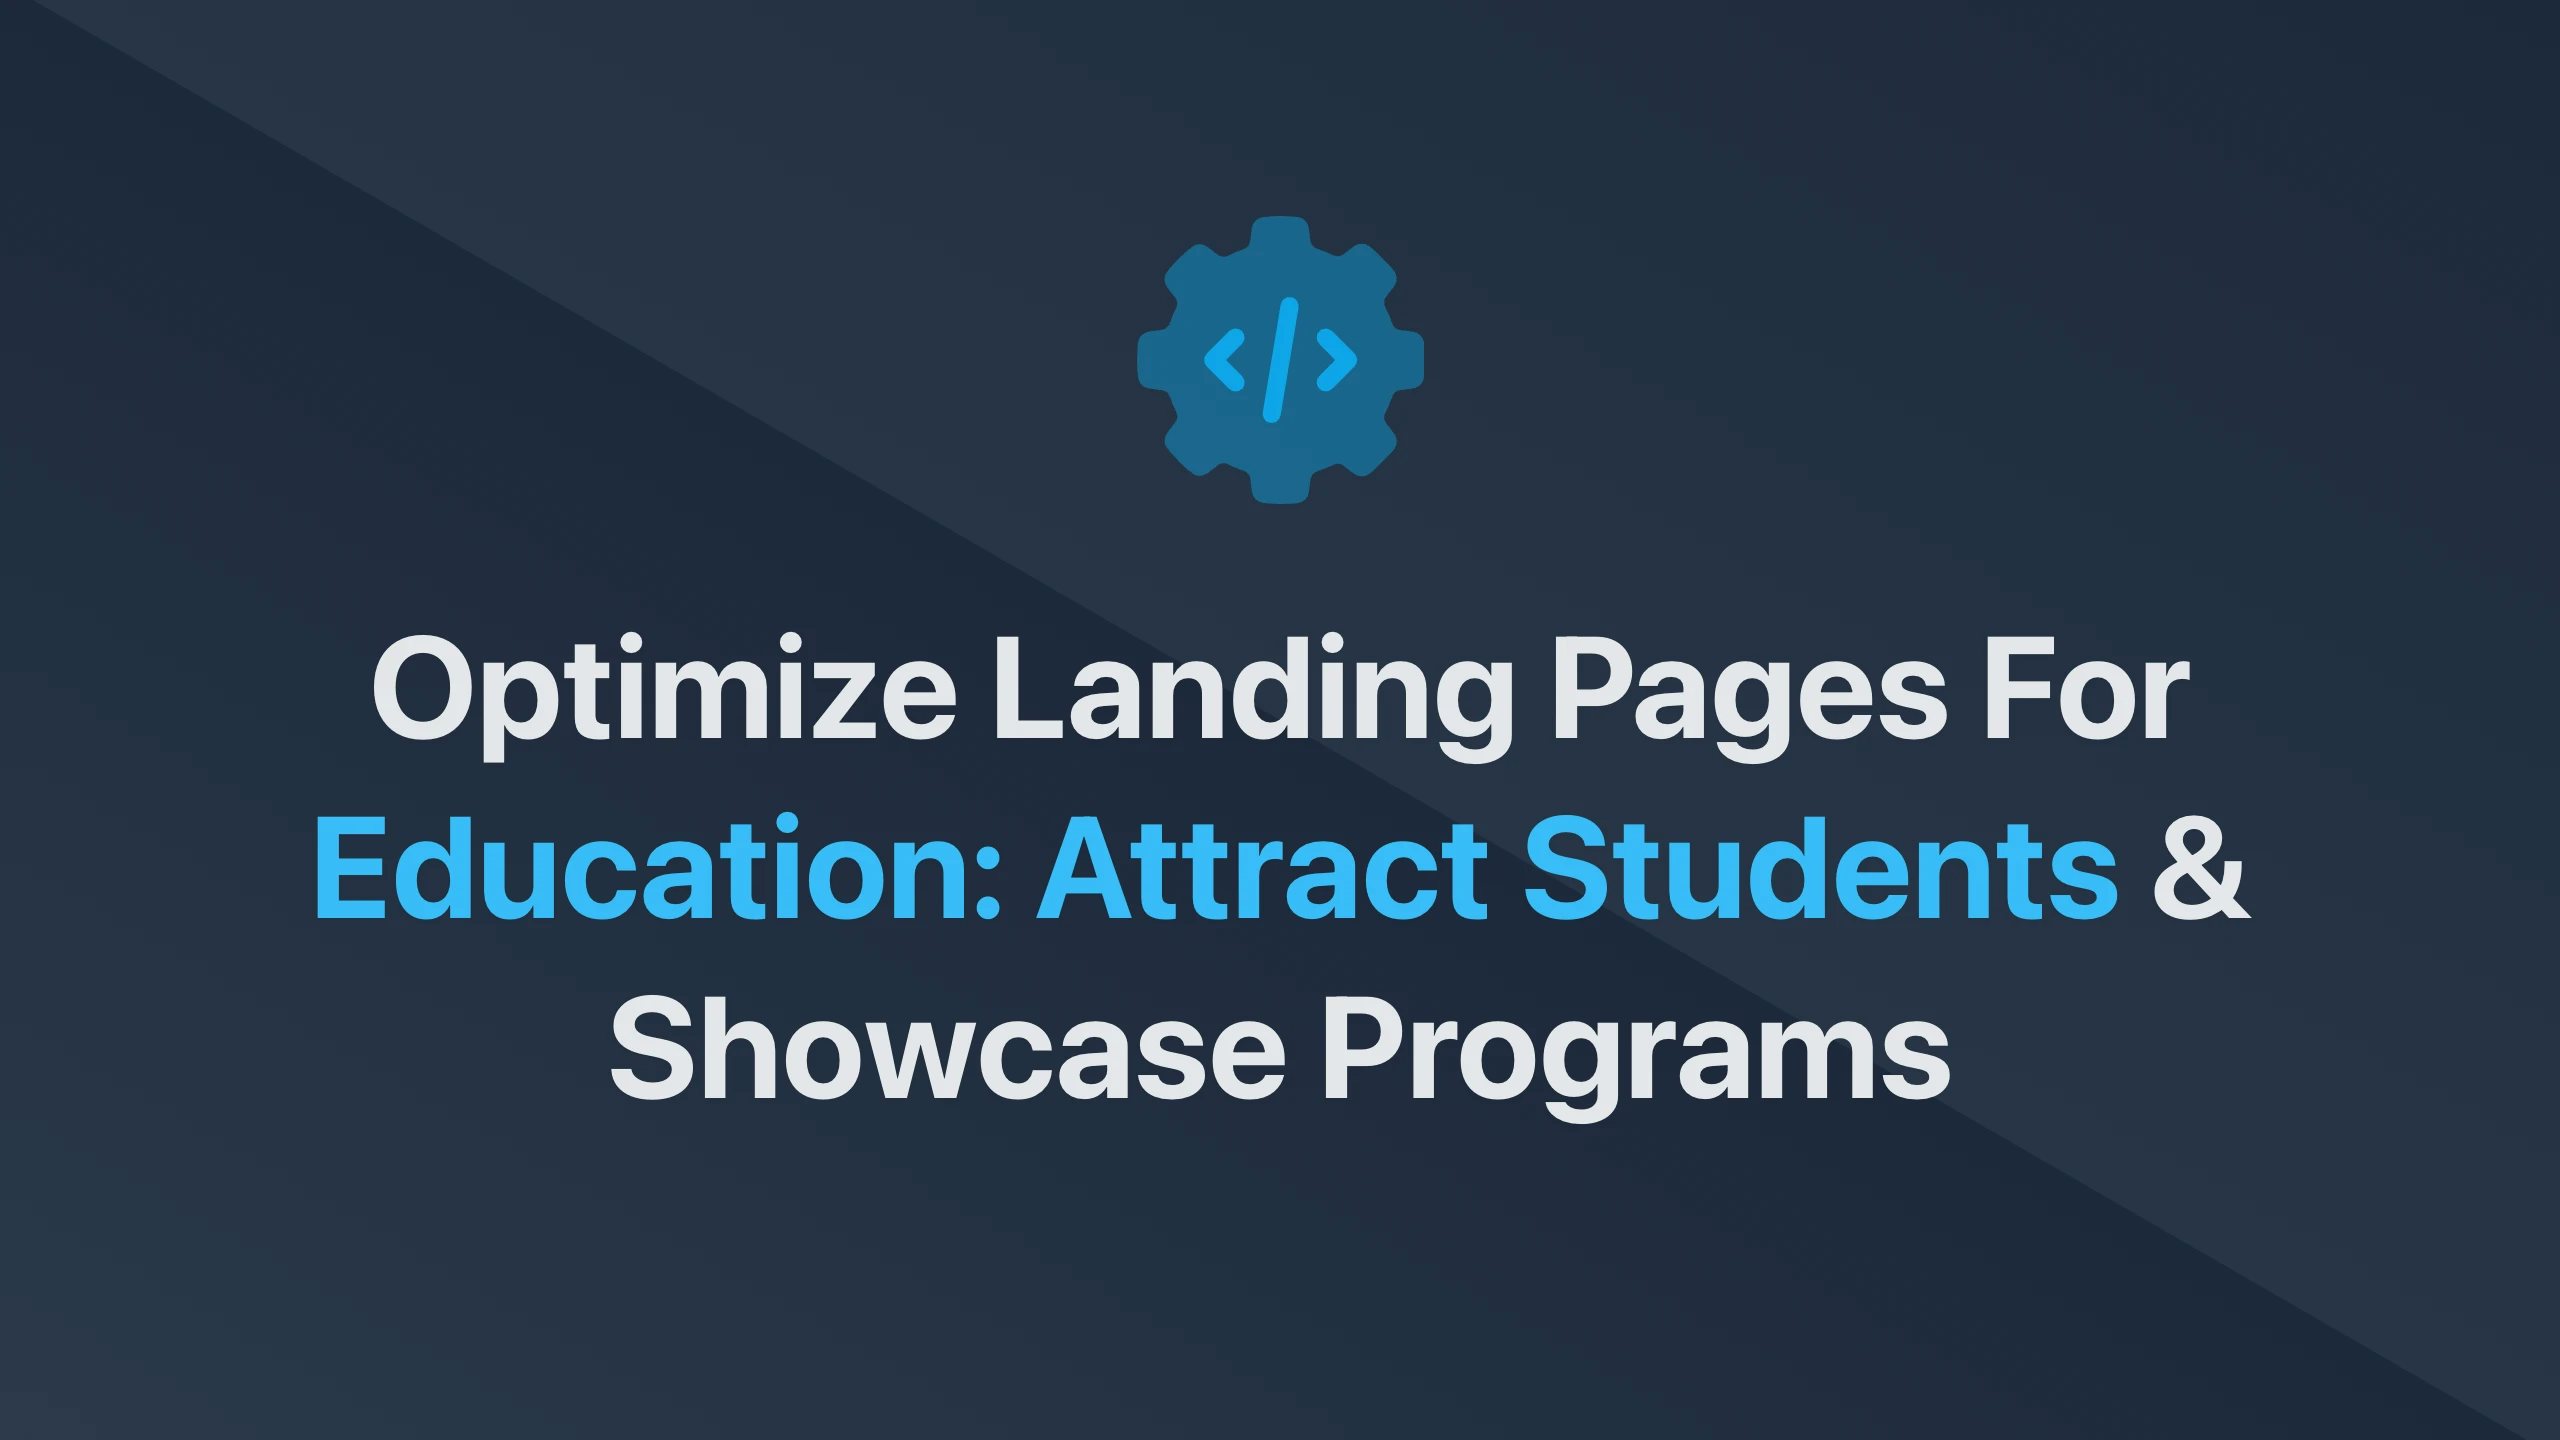 Cover Image for Optimize Landing Pages for Education: Attract Students & Showcase Programs